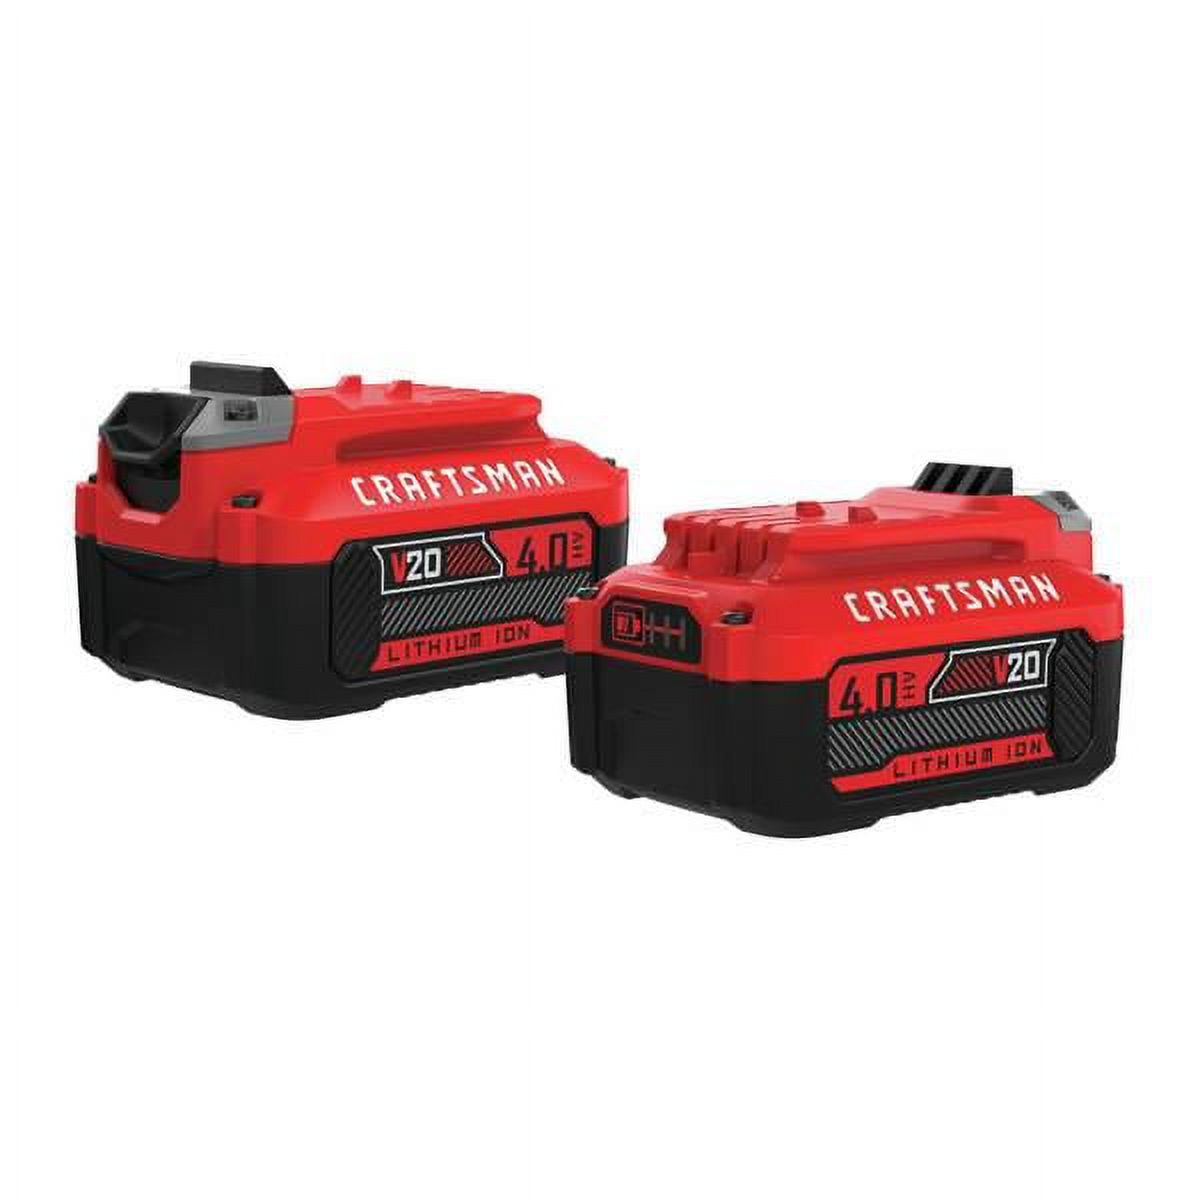 CRAFTSMAN V20 Lithium Ion Battery, 4.0-Amp Hour, 2 Pack (CMCB204-2) - image 1 of 1